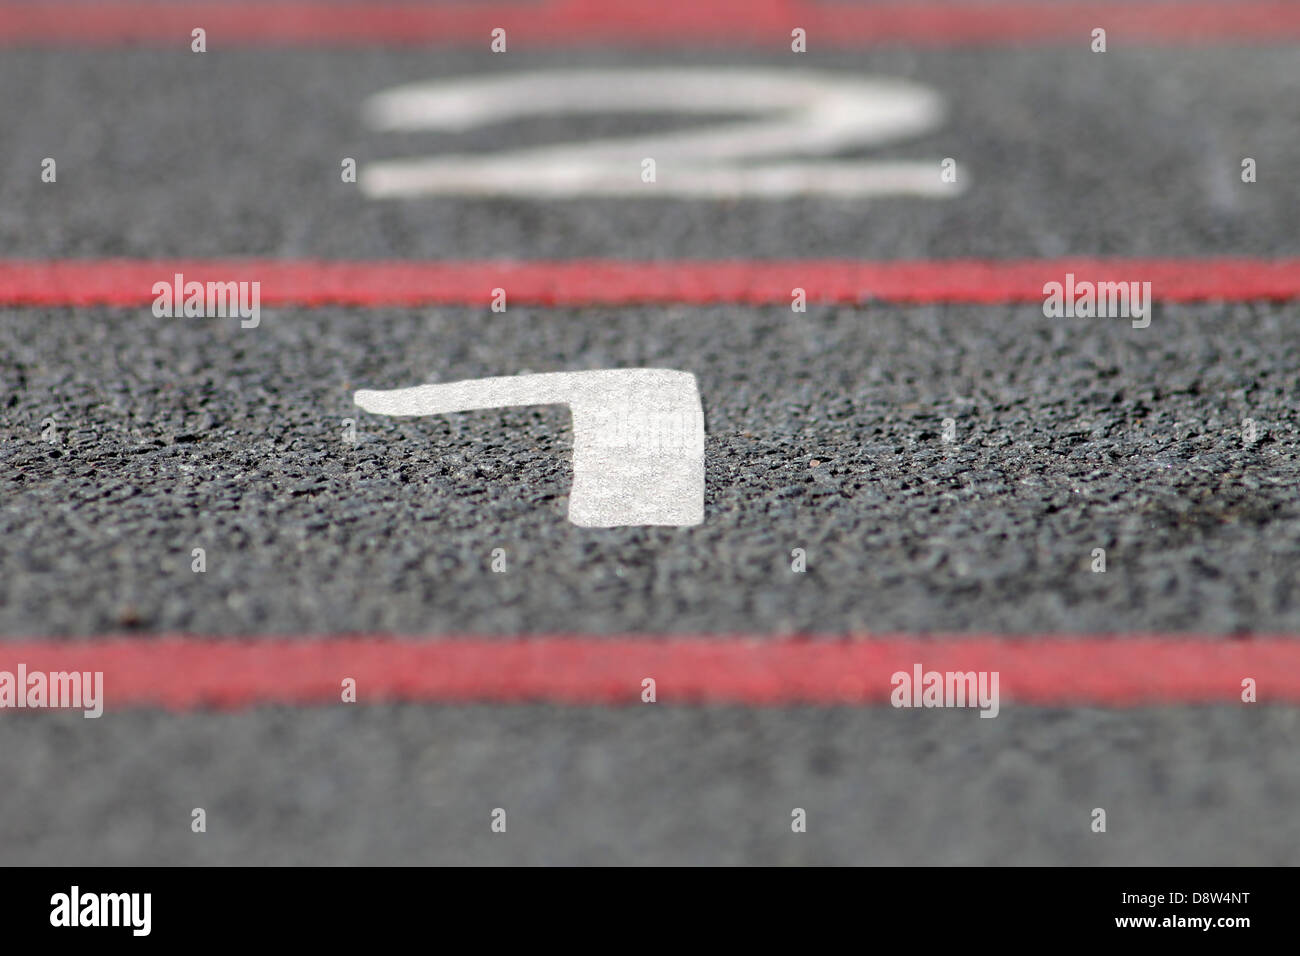 Number 1 starting line or position on hopscotch court. Stock Photo